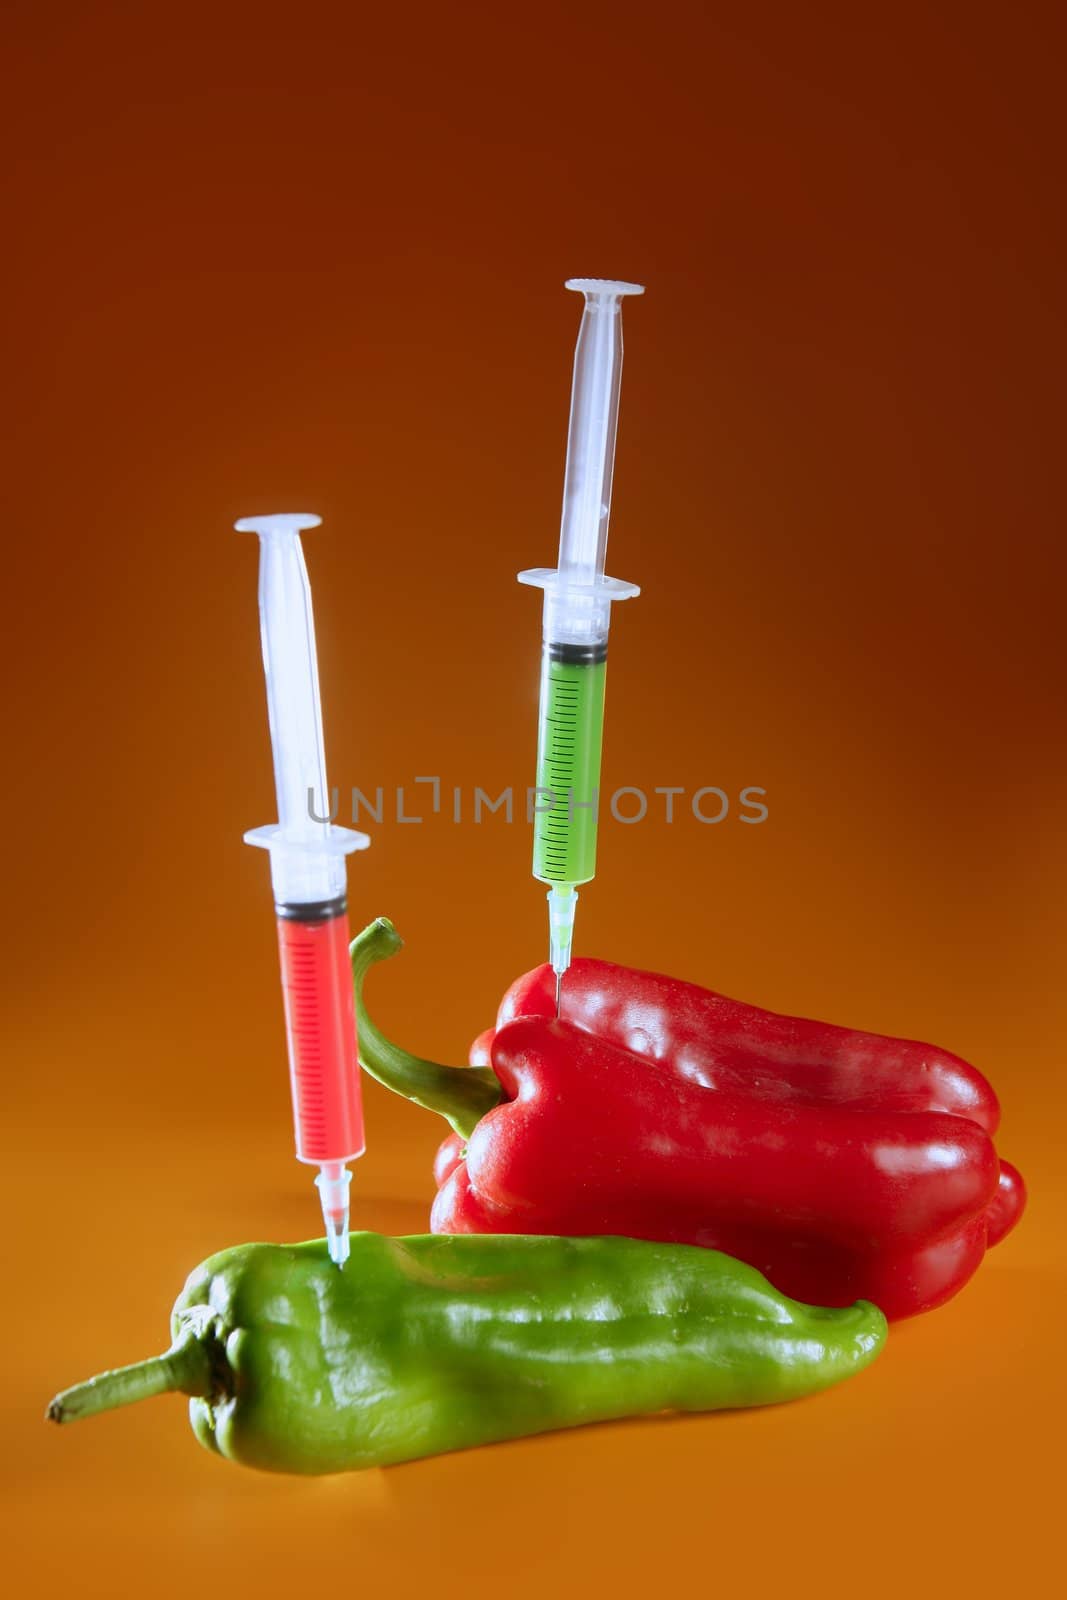 Two pepper in red and green with inverted syringe colors